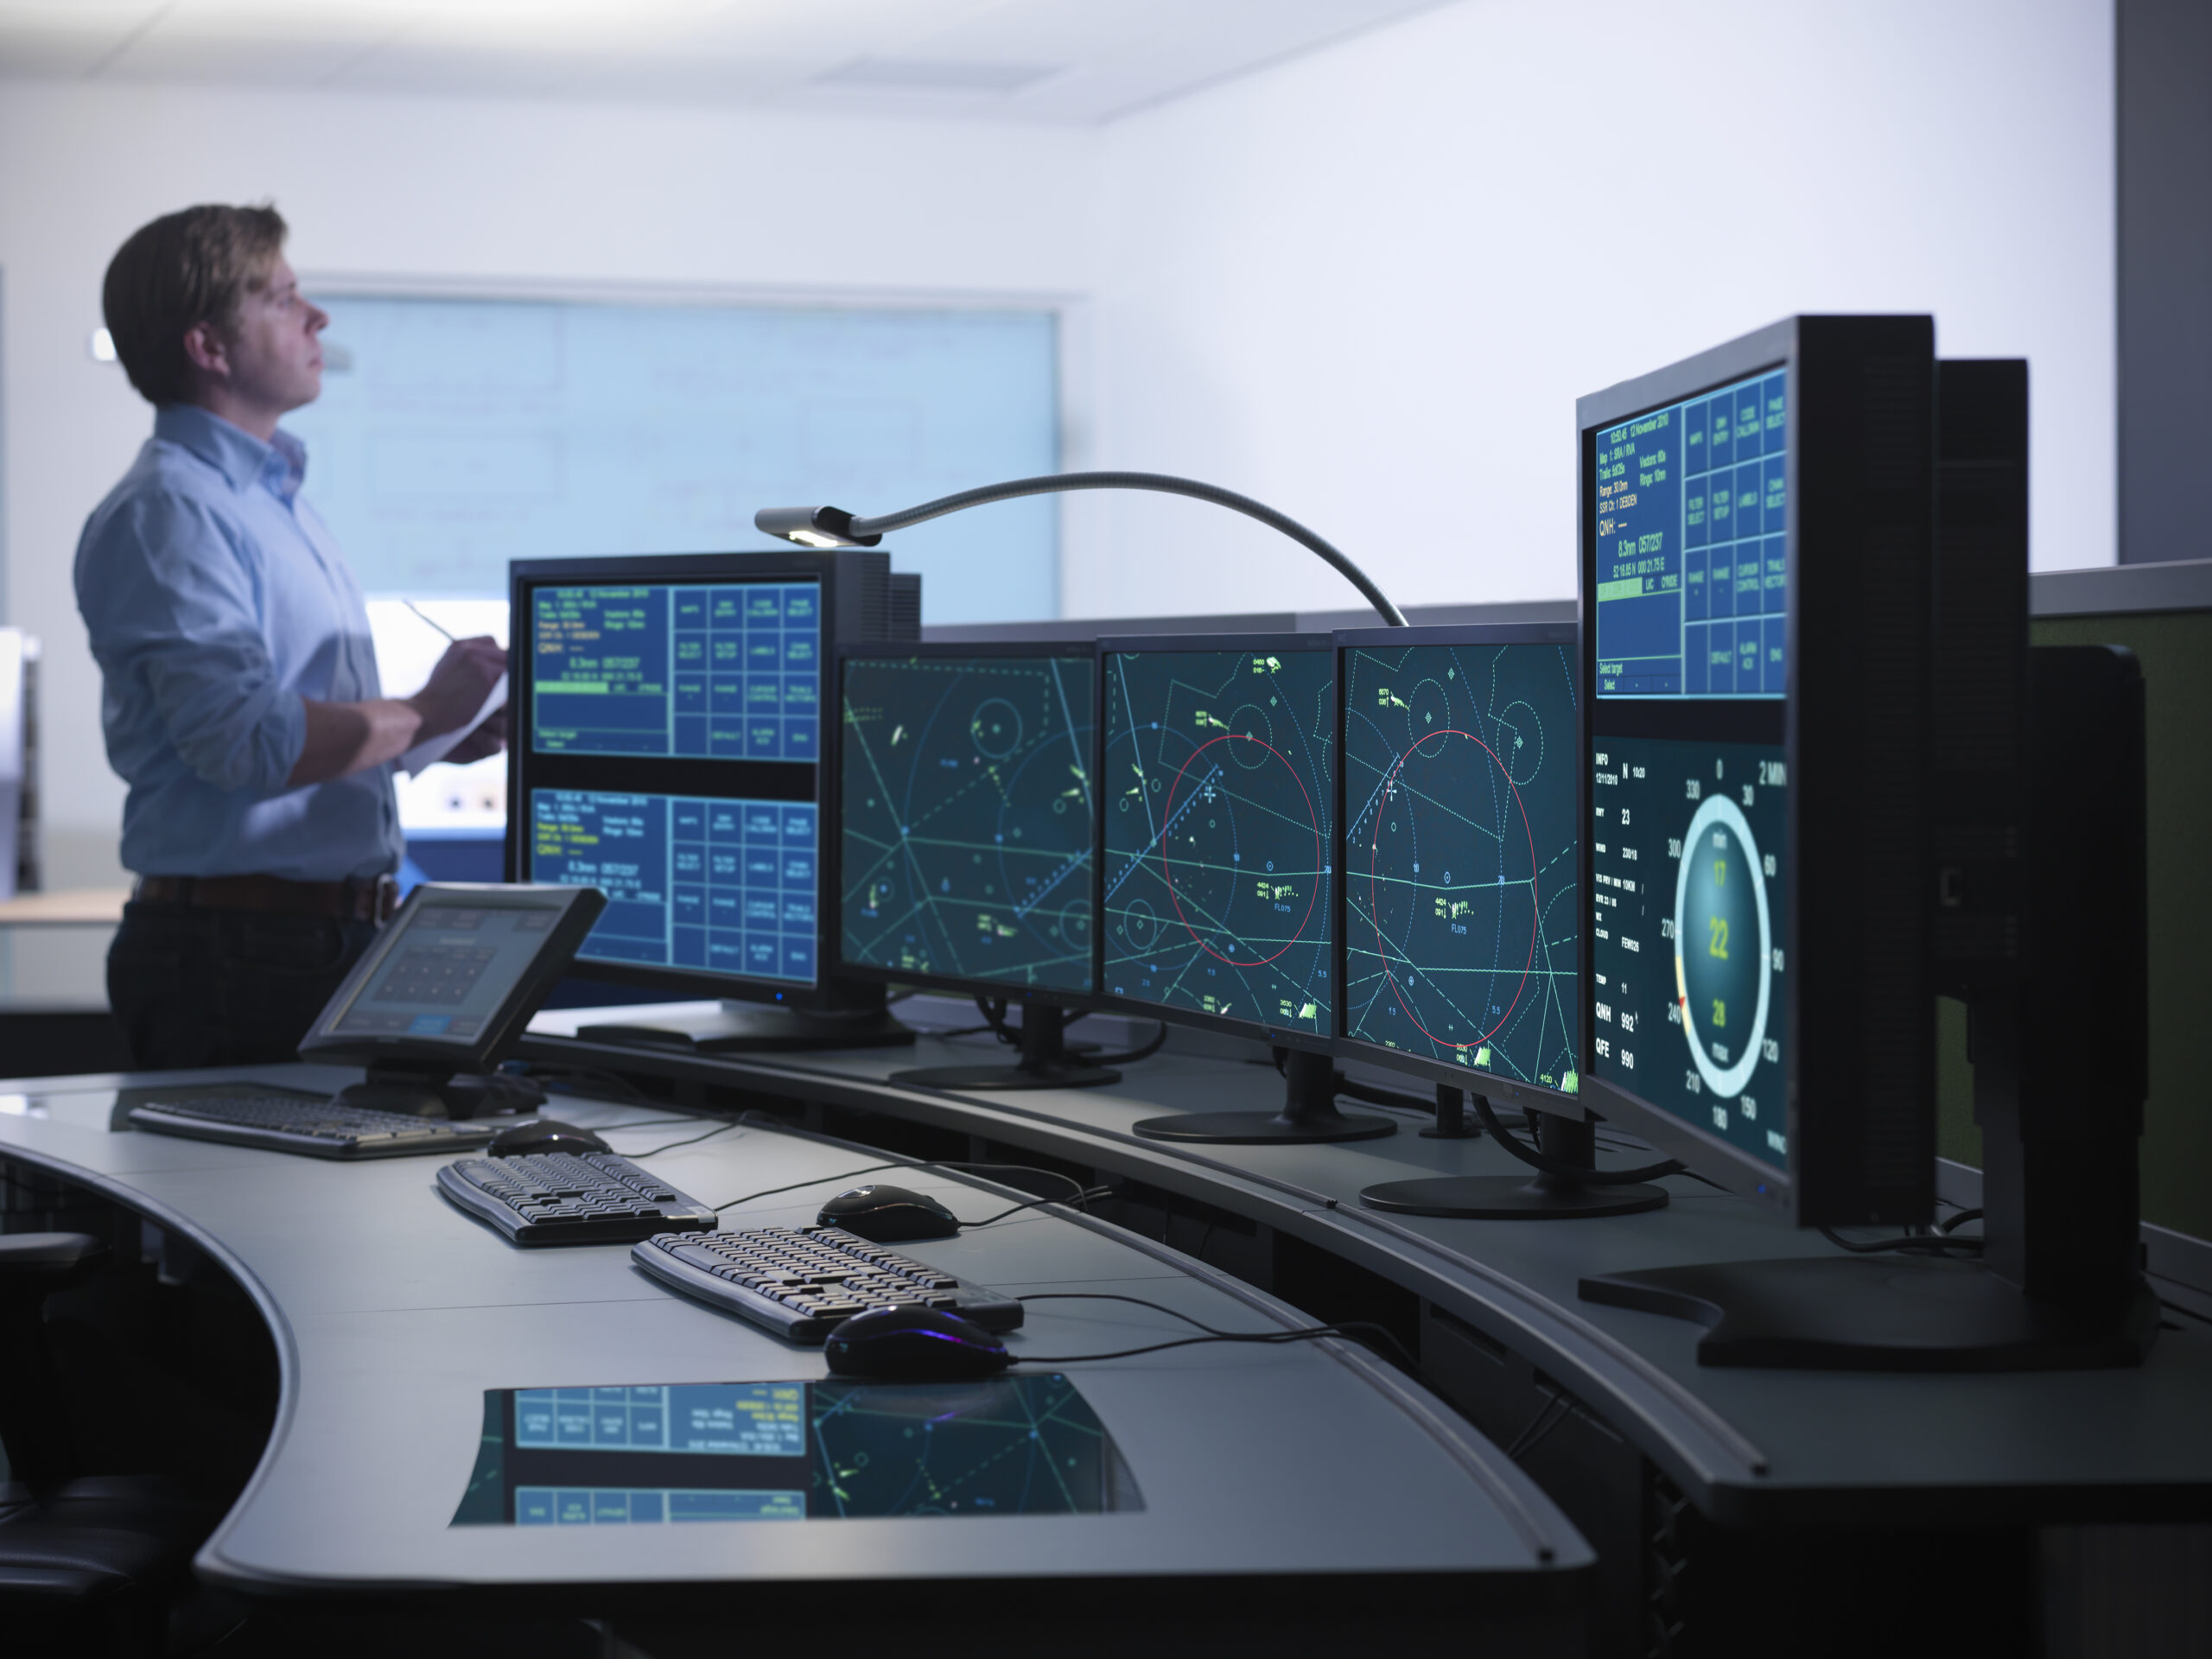 Content Management Systems within a control centre environment 